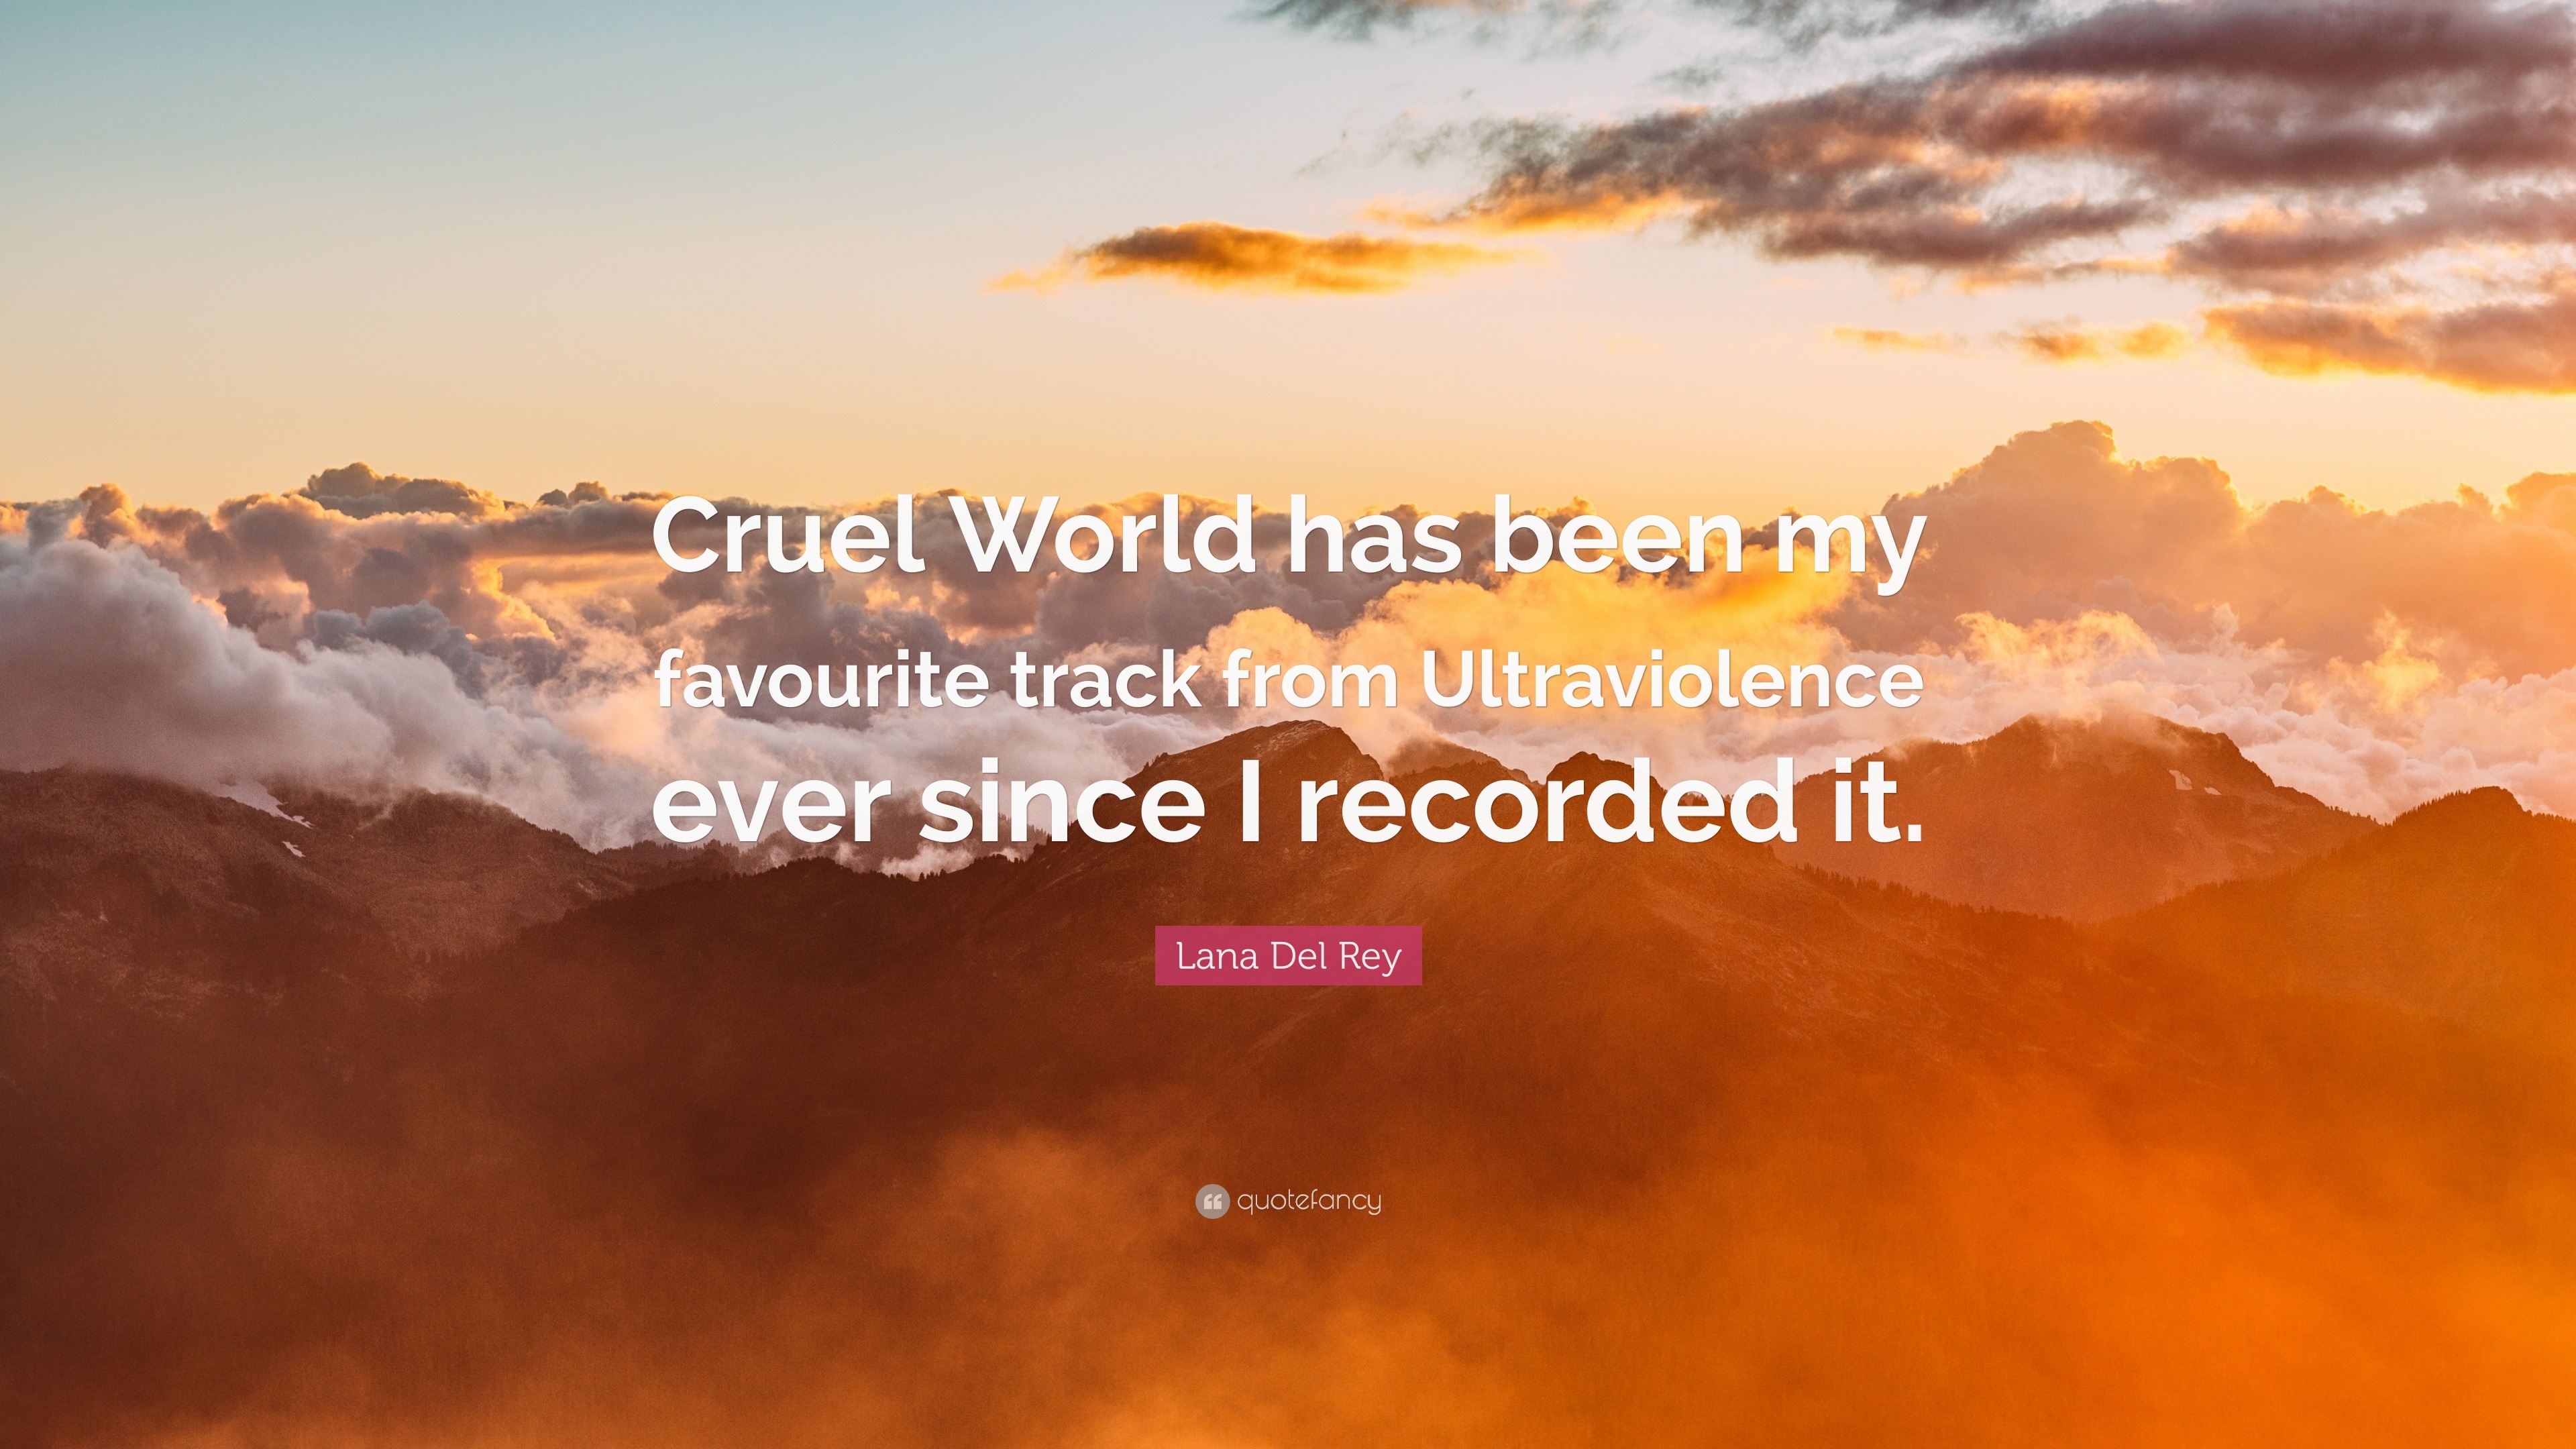 Lana Del Rey Quote “Cruel World has been my favourite track from